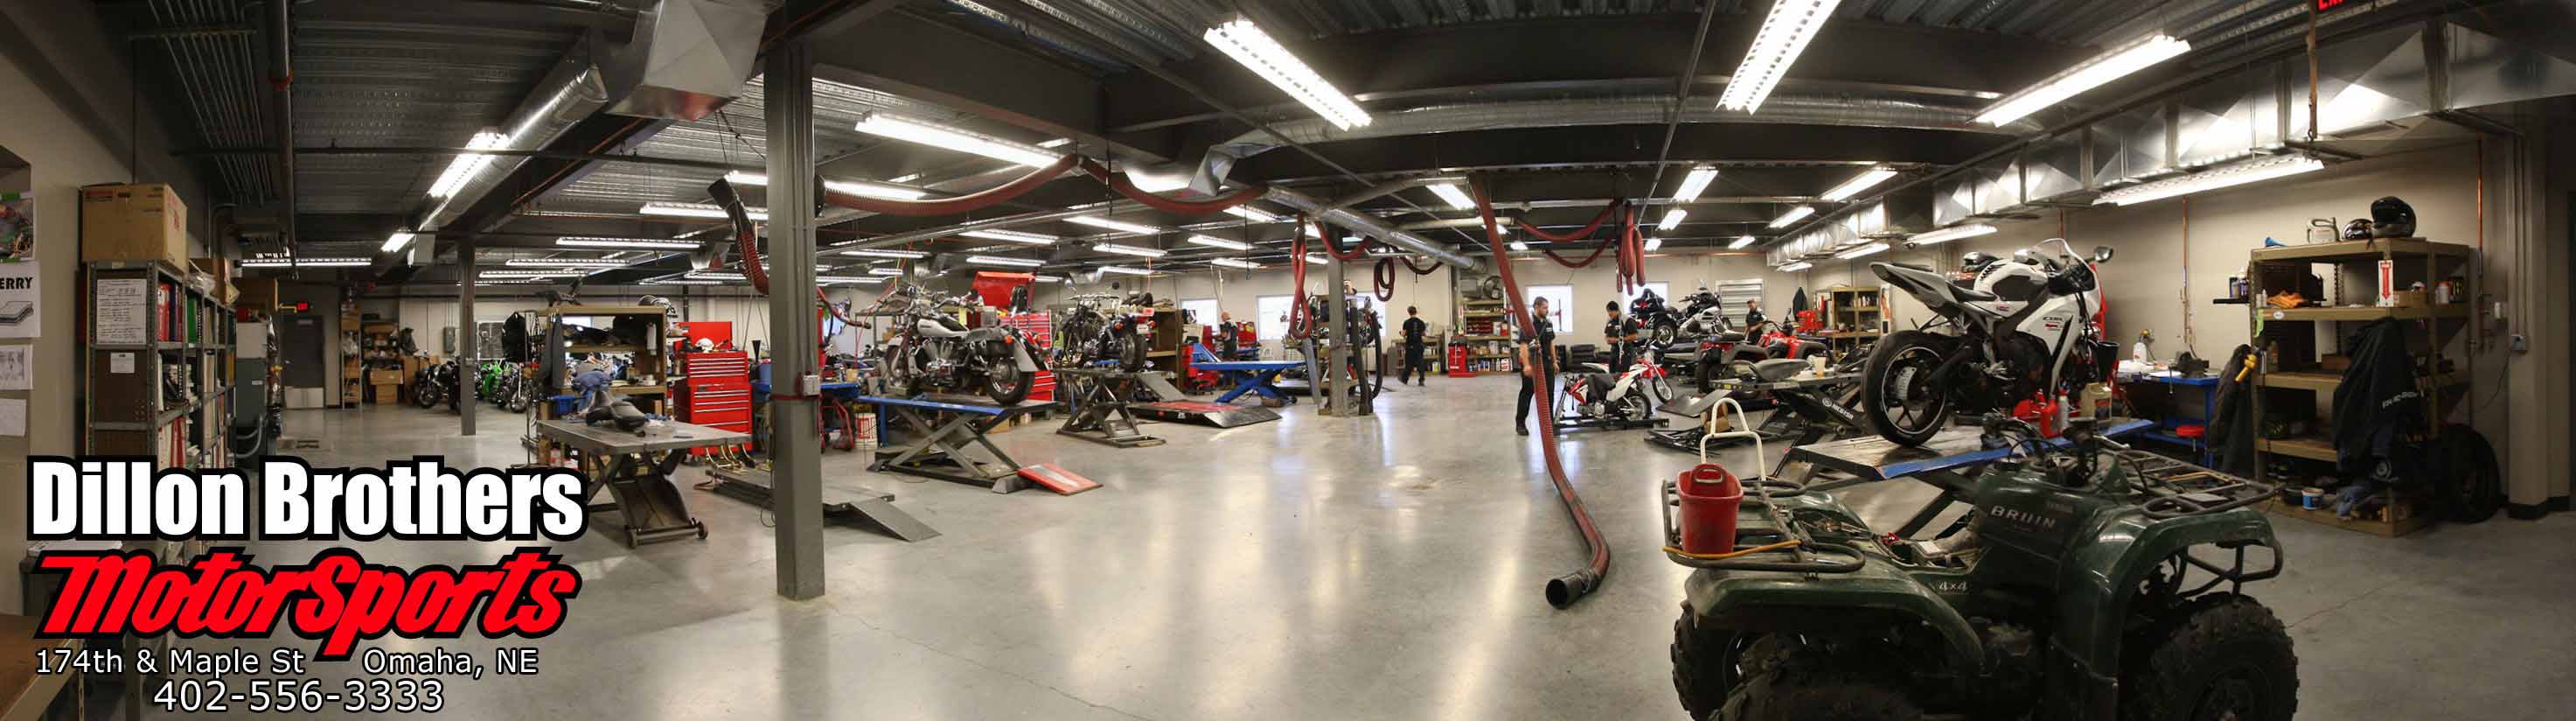 Showroom in Dillon Brothers MotorSports